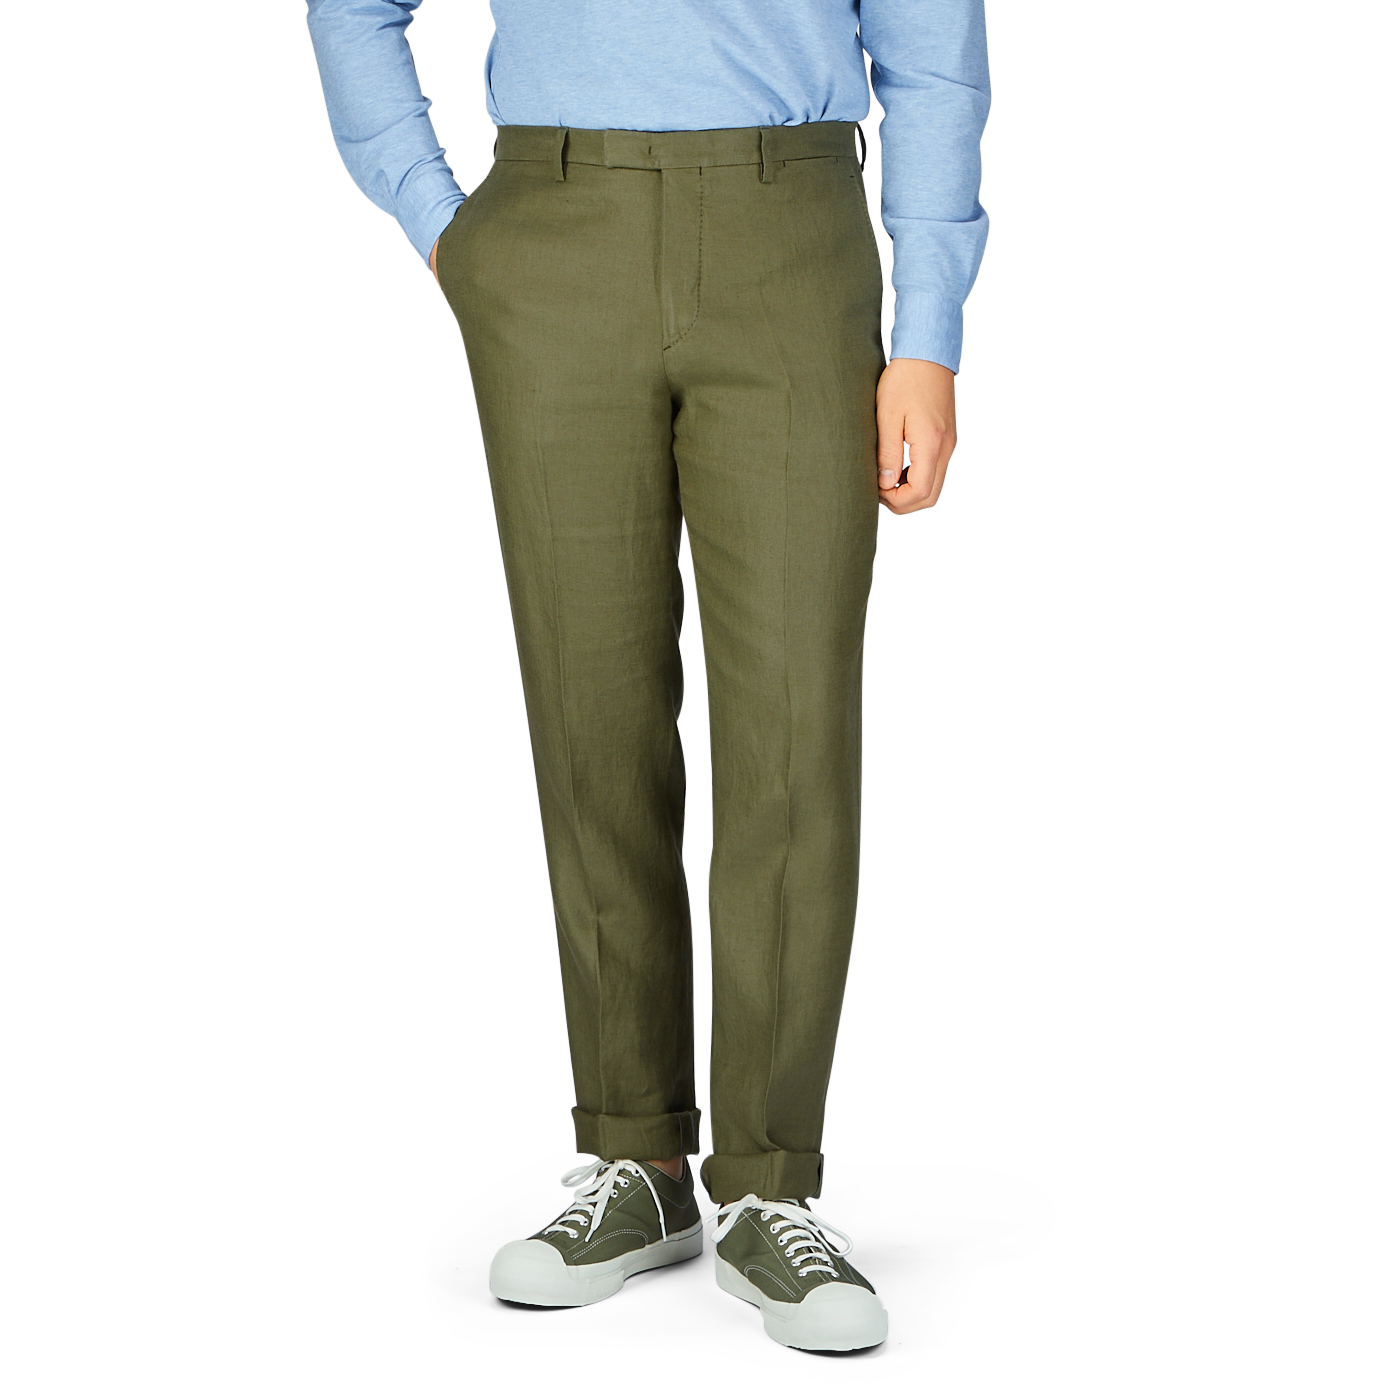 Olive green tapered leg trousers (Green Washed Irish Linen Trousers by Boglioli) paired with casual sneakers and a blue shirt.